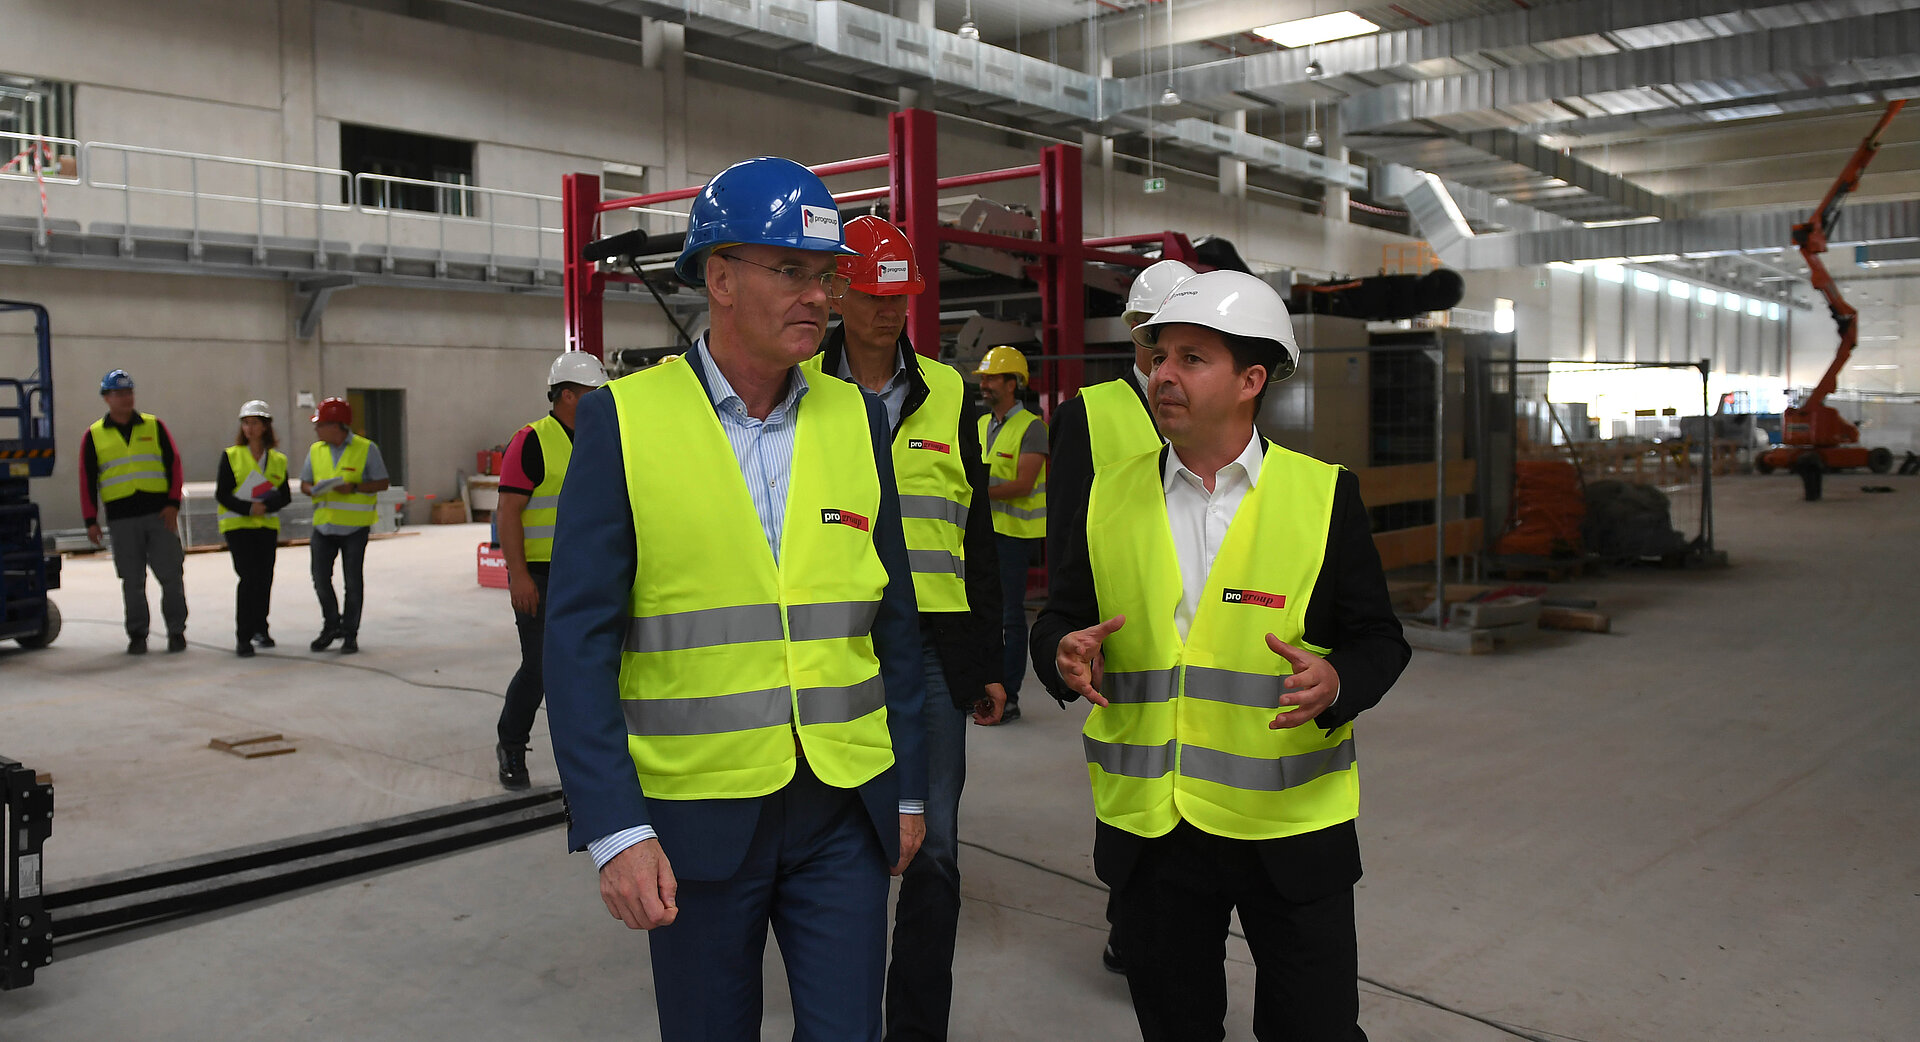 Progroup_Eisfeld_Construction site tour: Andreas Krey, Chairman of the Board of Management of the State Development Corporation of Thuringia (left); Philipp Kosloh, Chief Operation Officer (COO) Progroup AG (right)